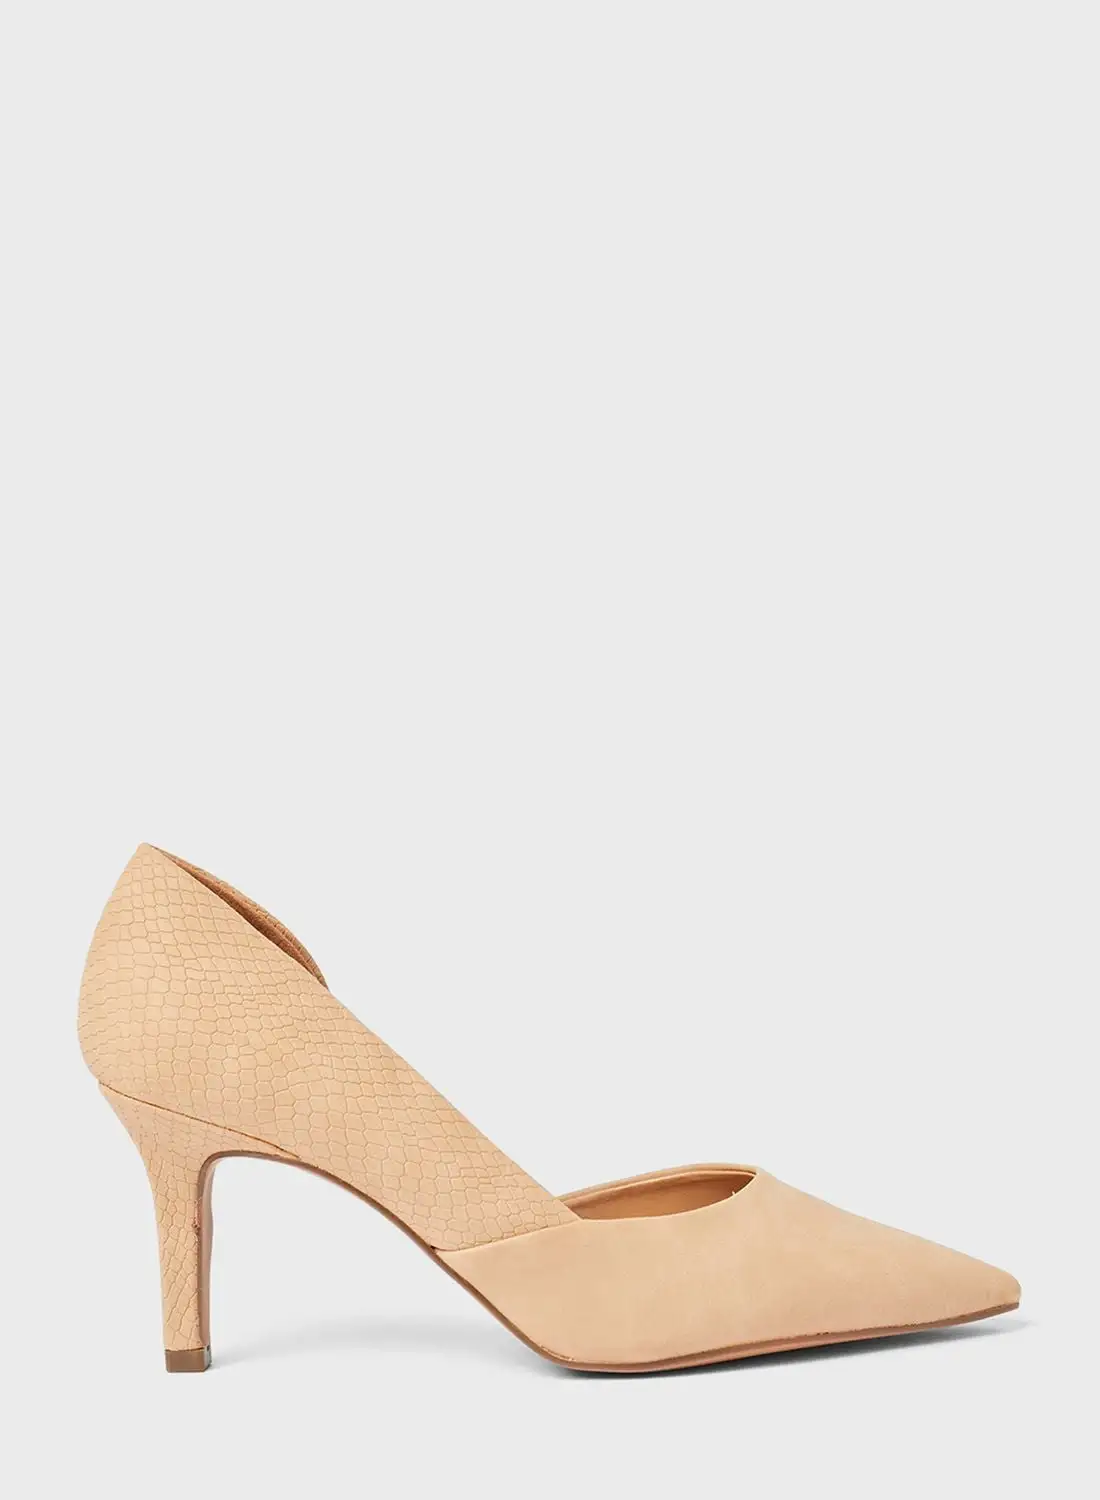 CALL IT SPRING Ariaa D'Orsay Pumps